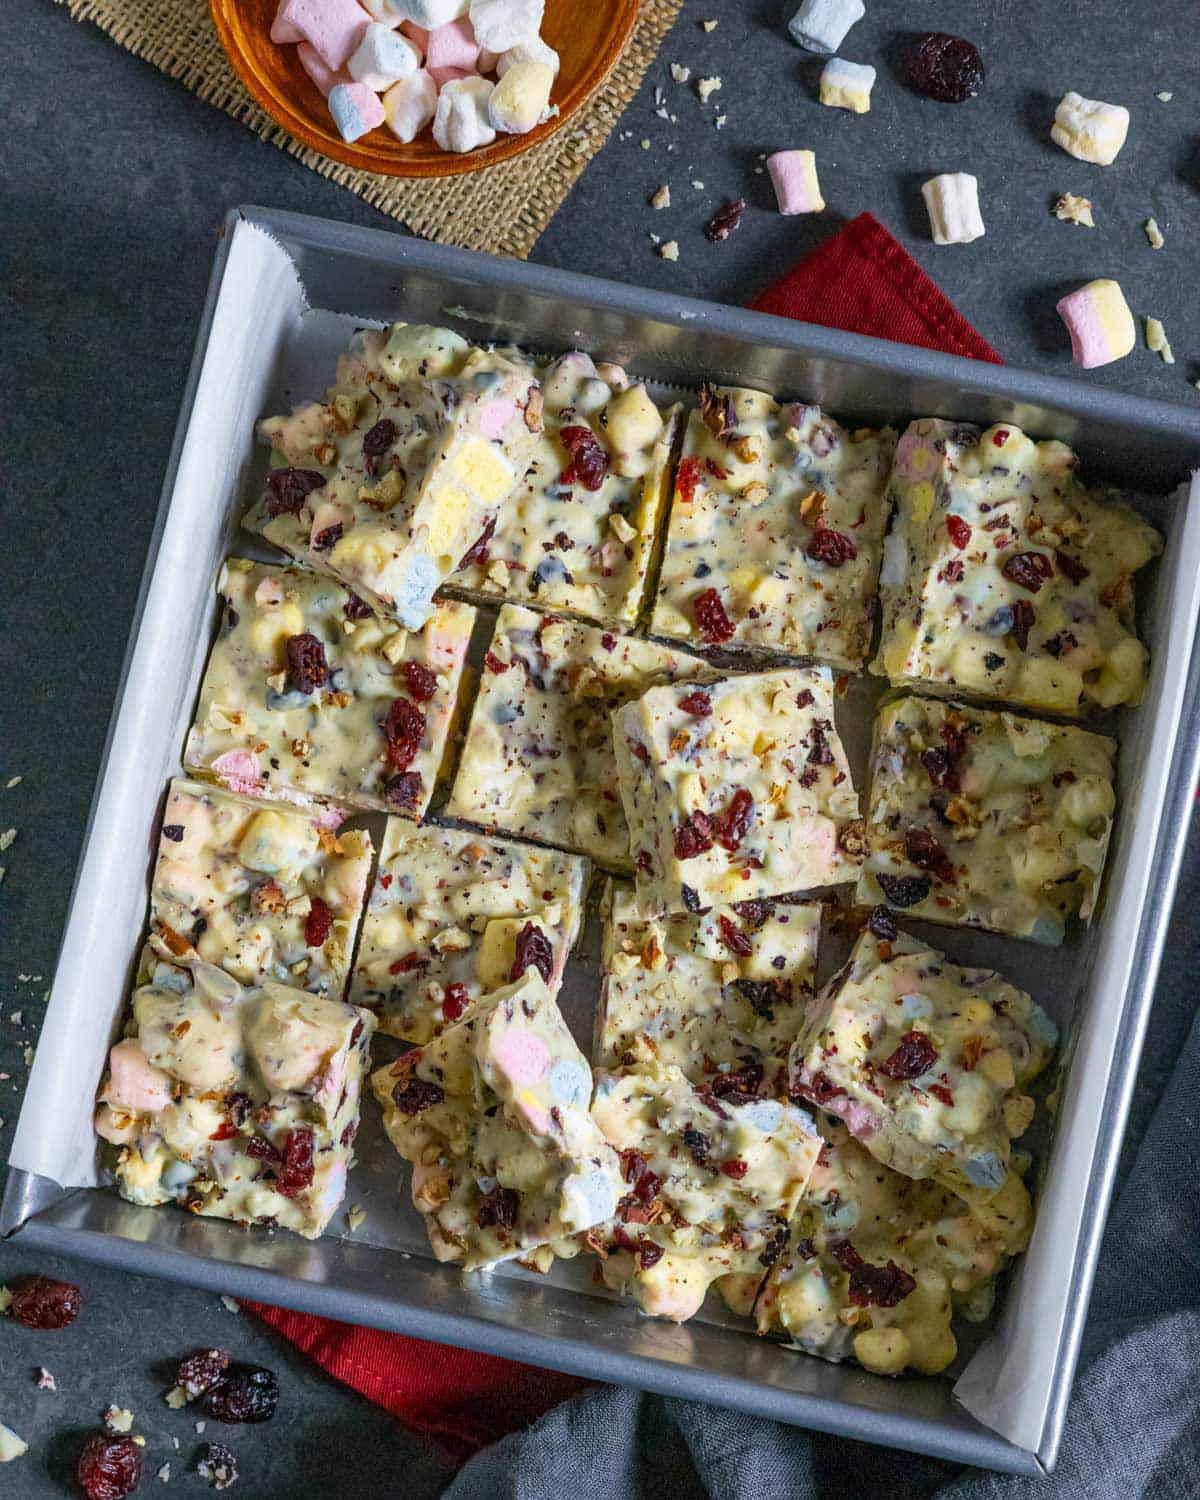 Square pan of white chocolate rocky road cut into squares with some tilted upward.